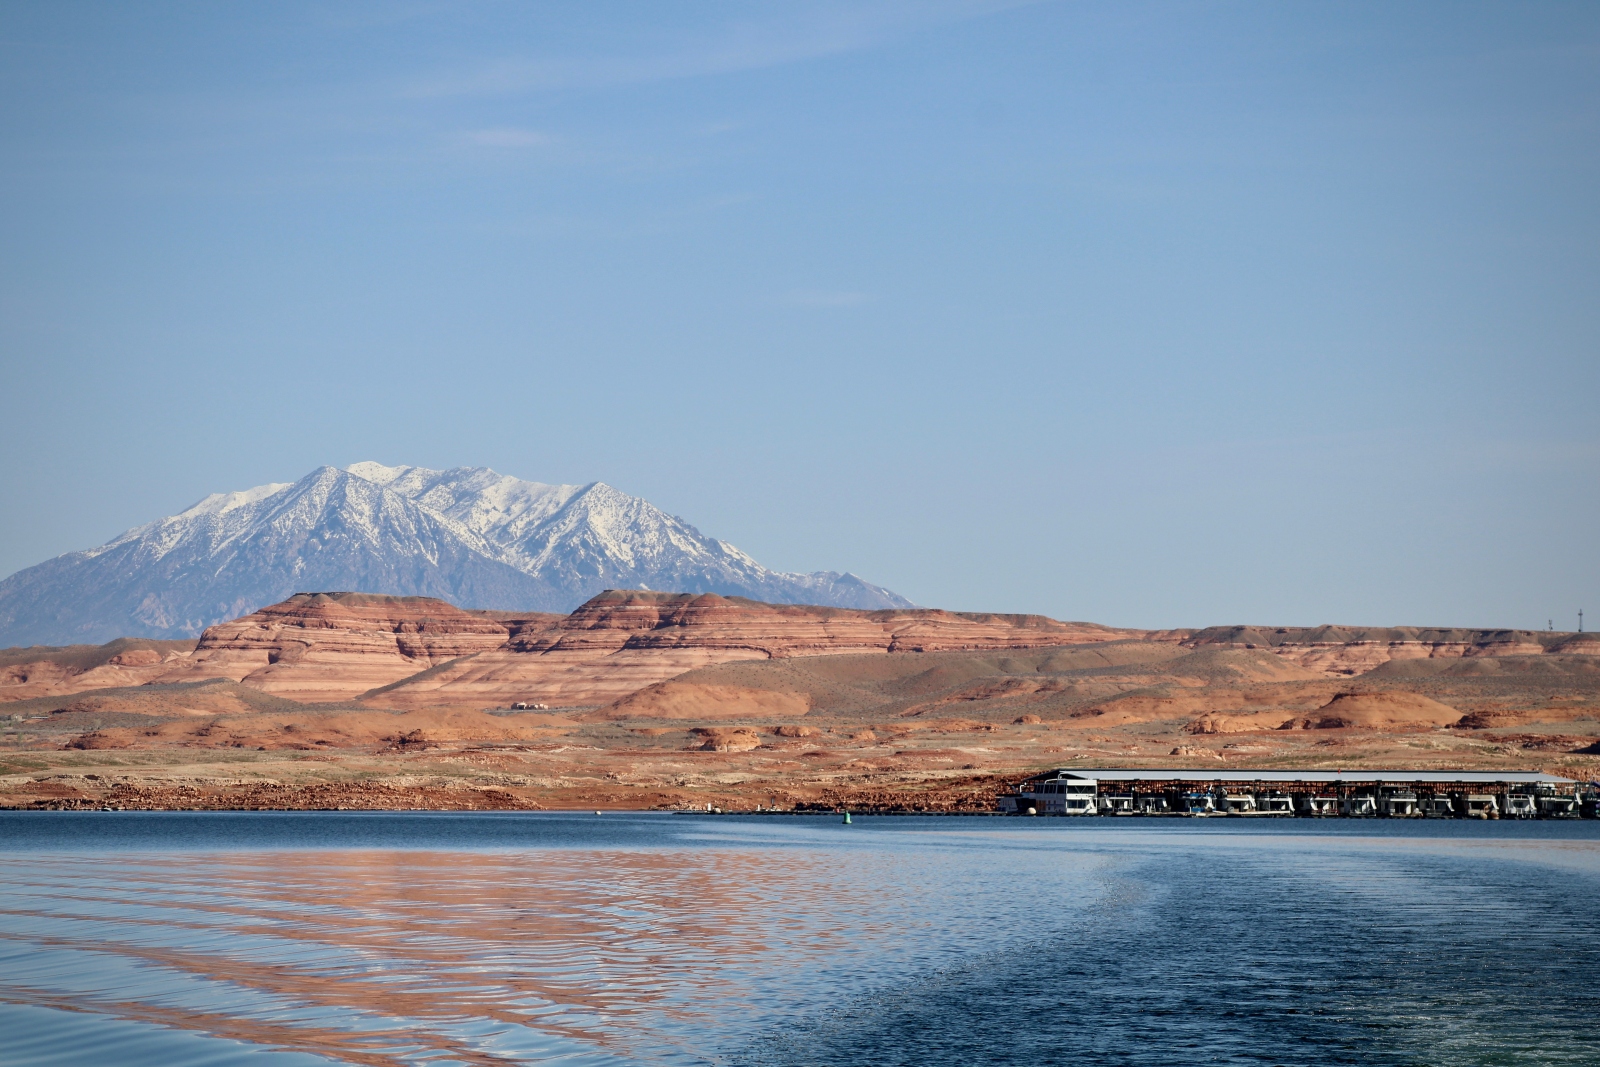 A snow-capped mountain rises behind red rock mesas and a lake.